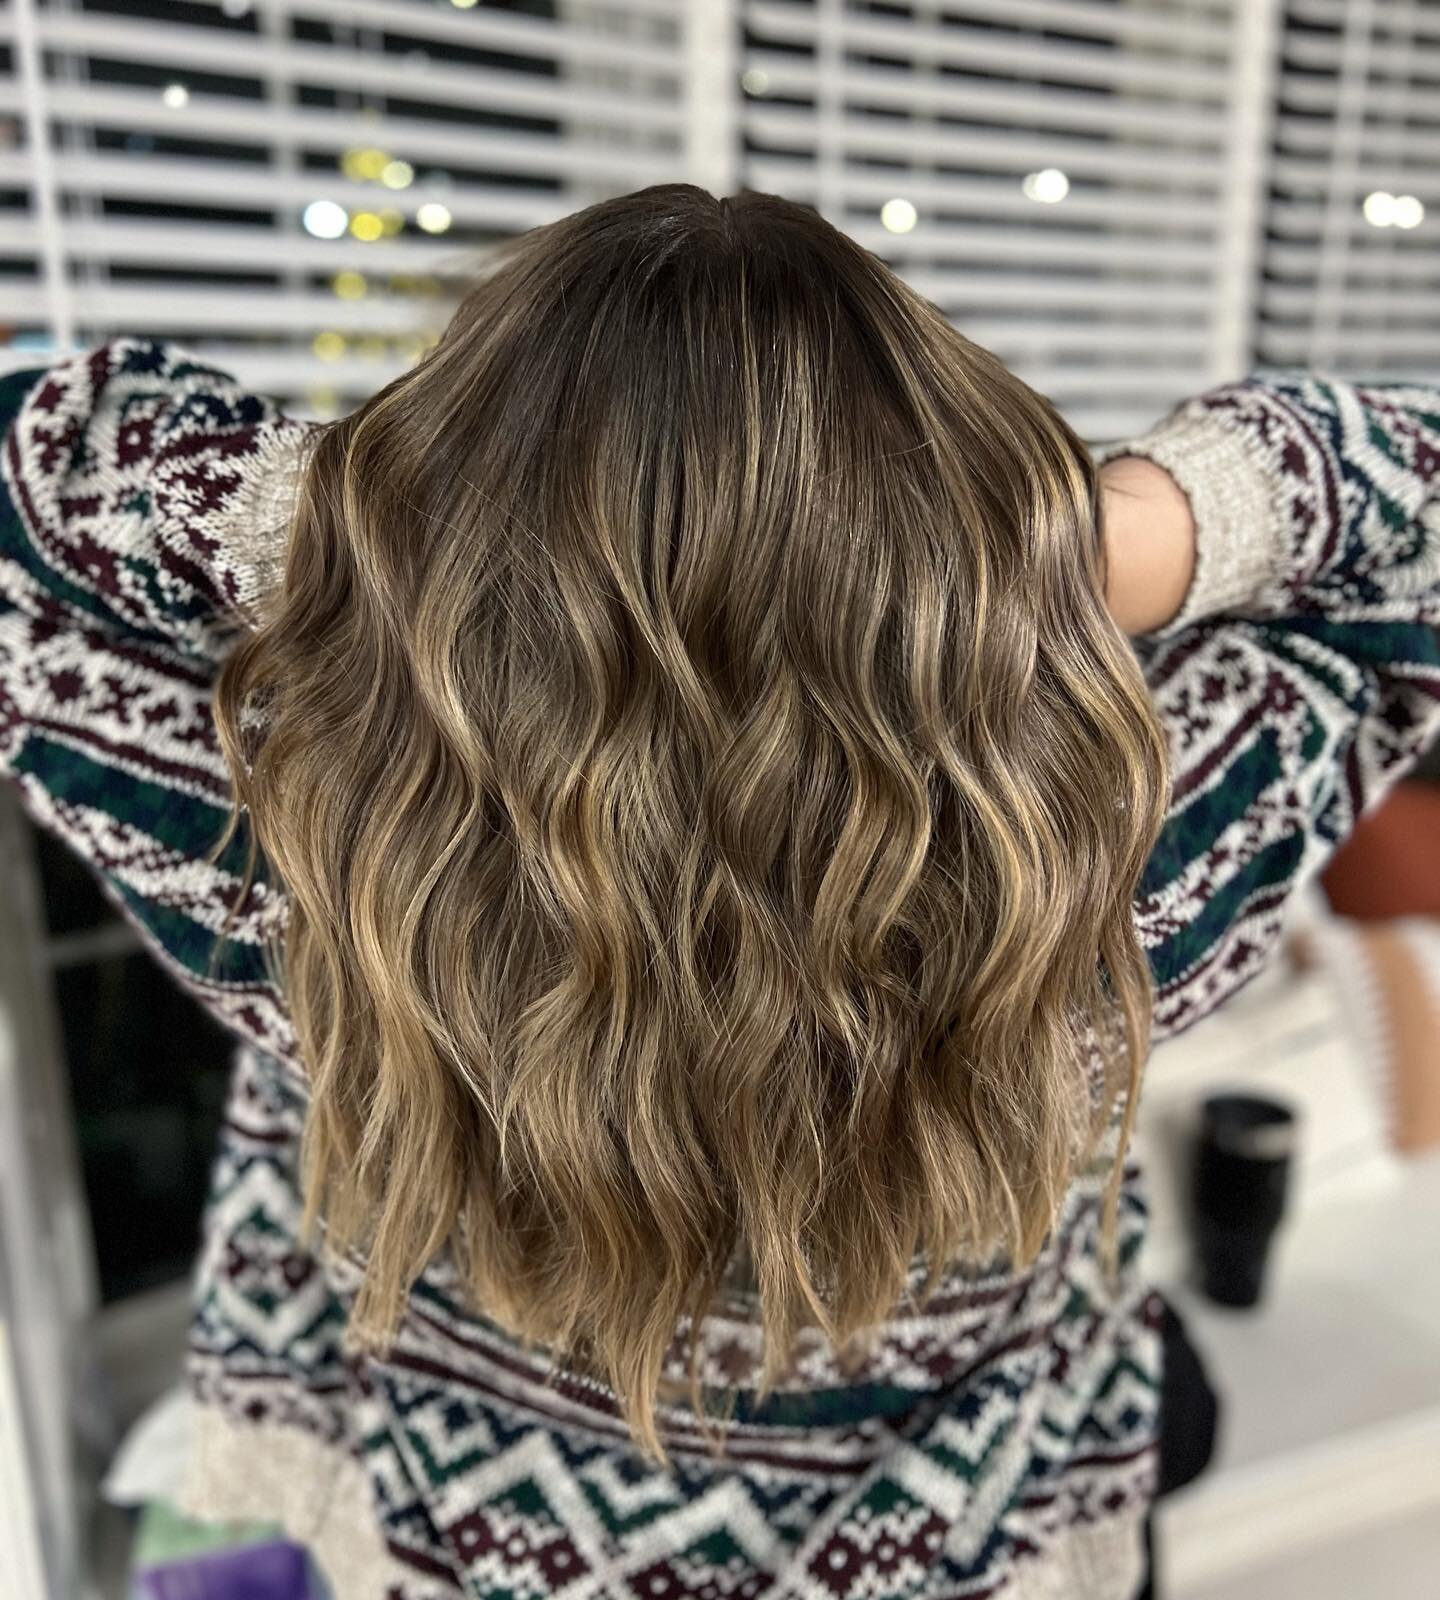 Brightened up this beauty today! 🌬️
- - - -

#stlstylist #stlhairstylist #stlhairsalon #stlhaircut #webstergrovesmo #websteruniversity #salonblvd #stlmodel #stlcolorist #brownhaircolor #hairtutorial #hairtrends #hairtips #brownhairstl #blondehairstl